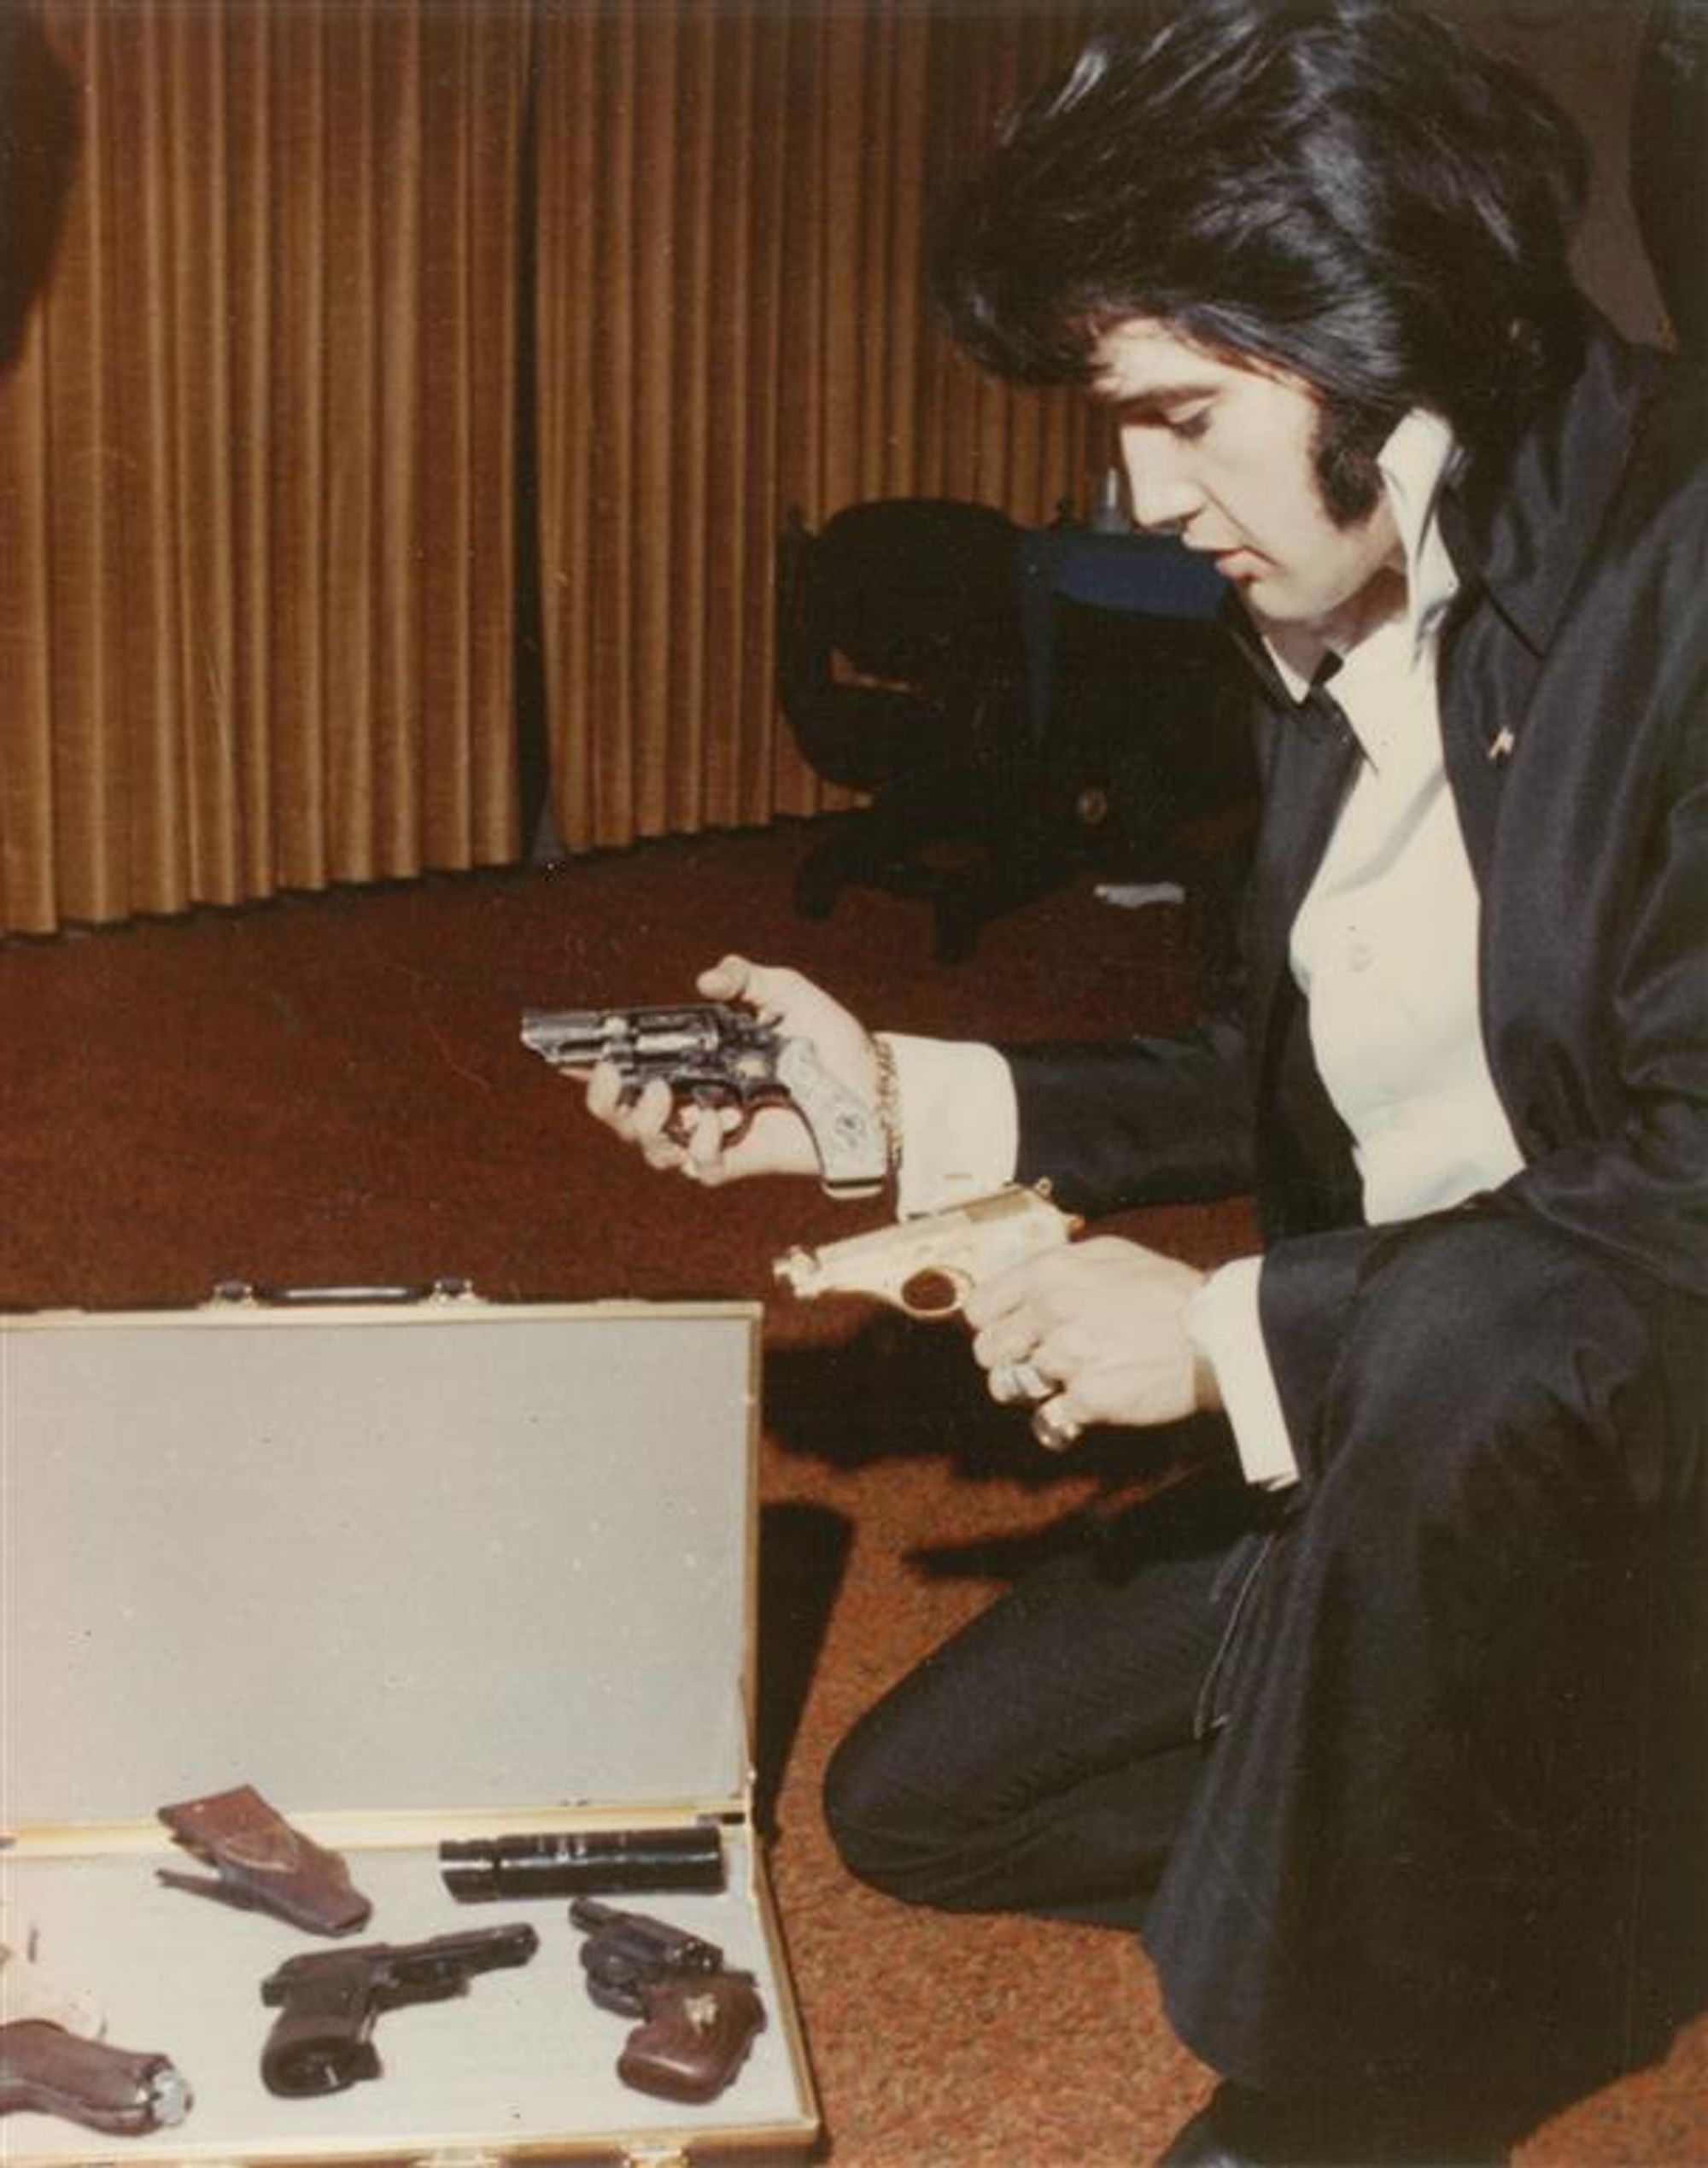 Elvis holding the Smith & Wesson 19-2